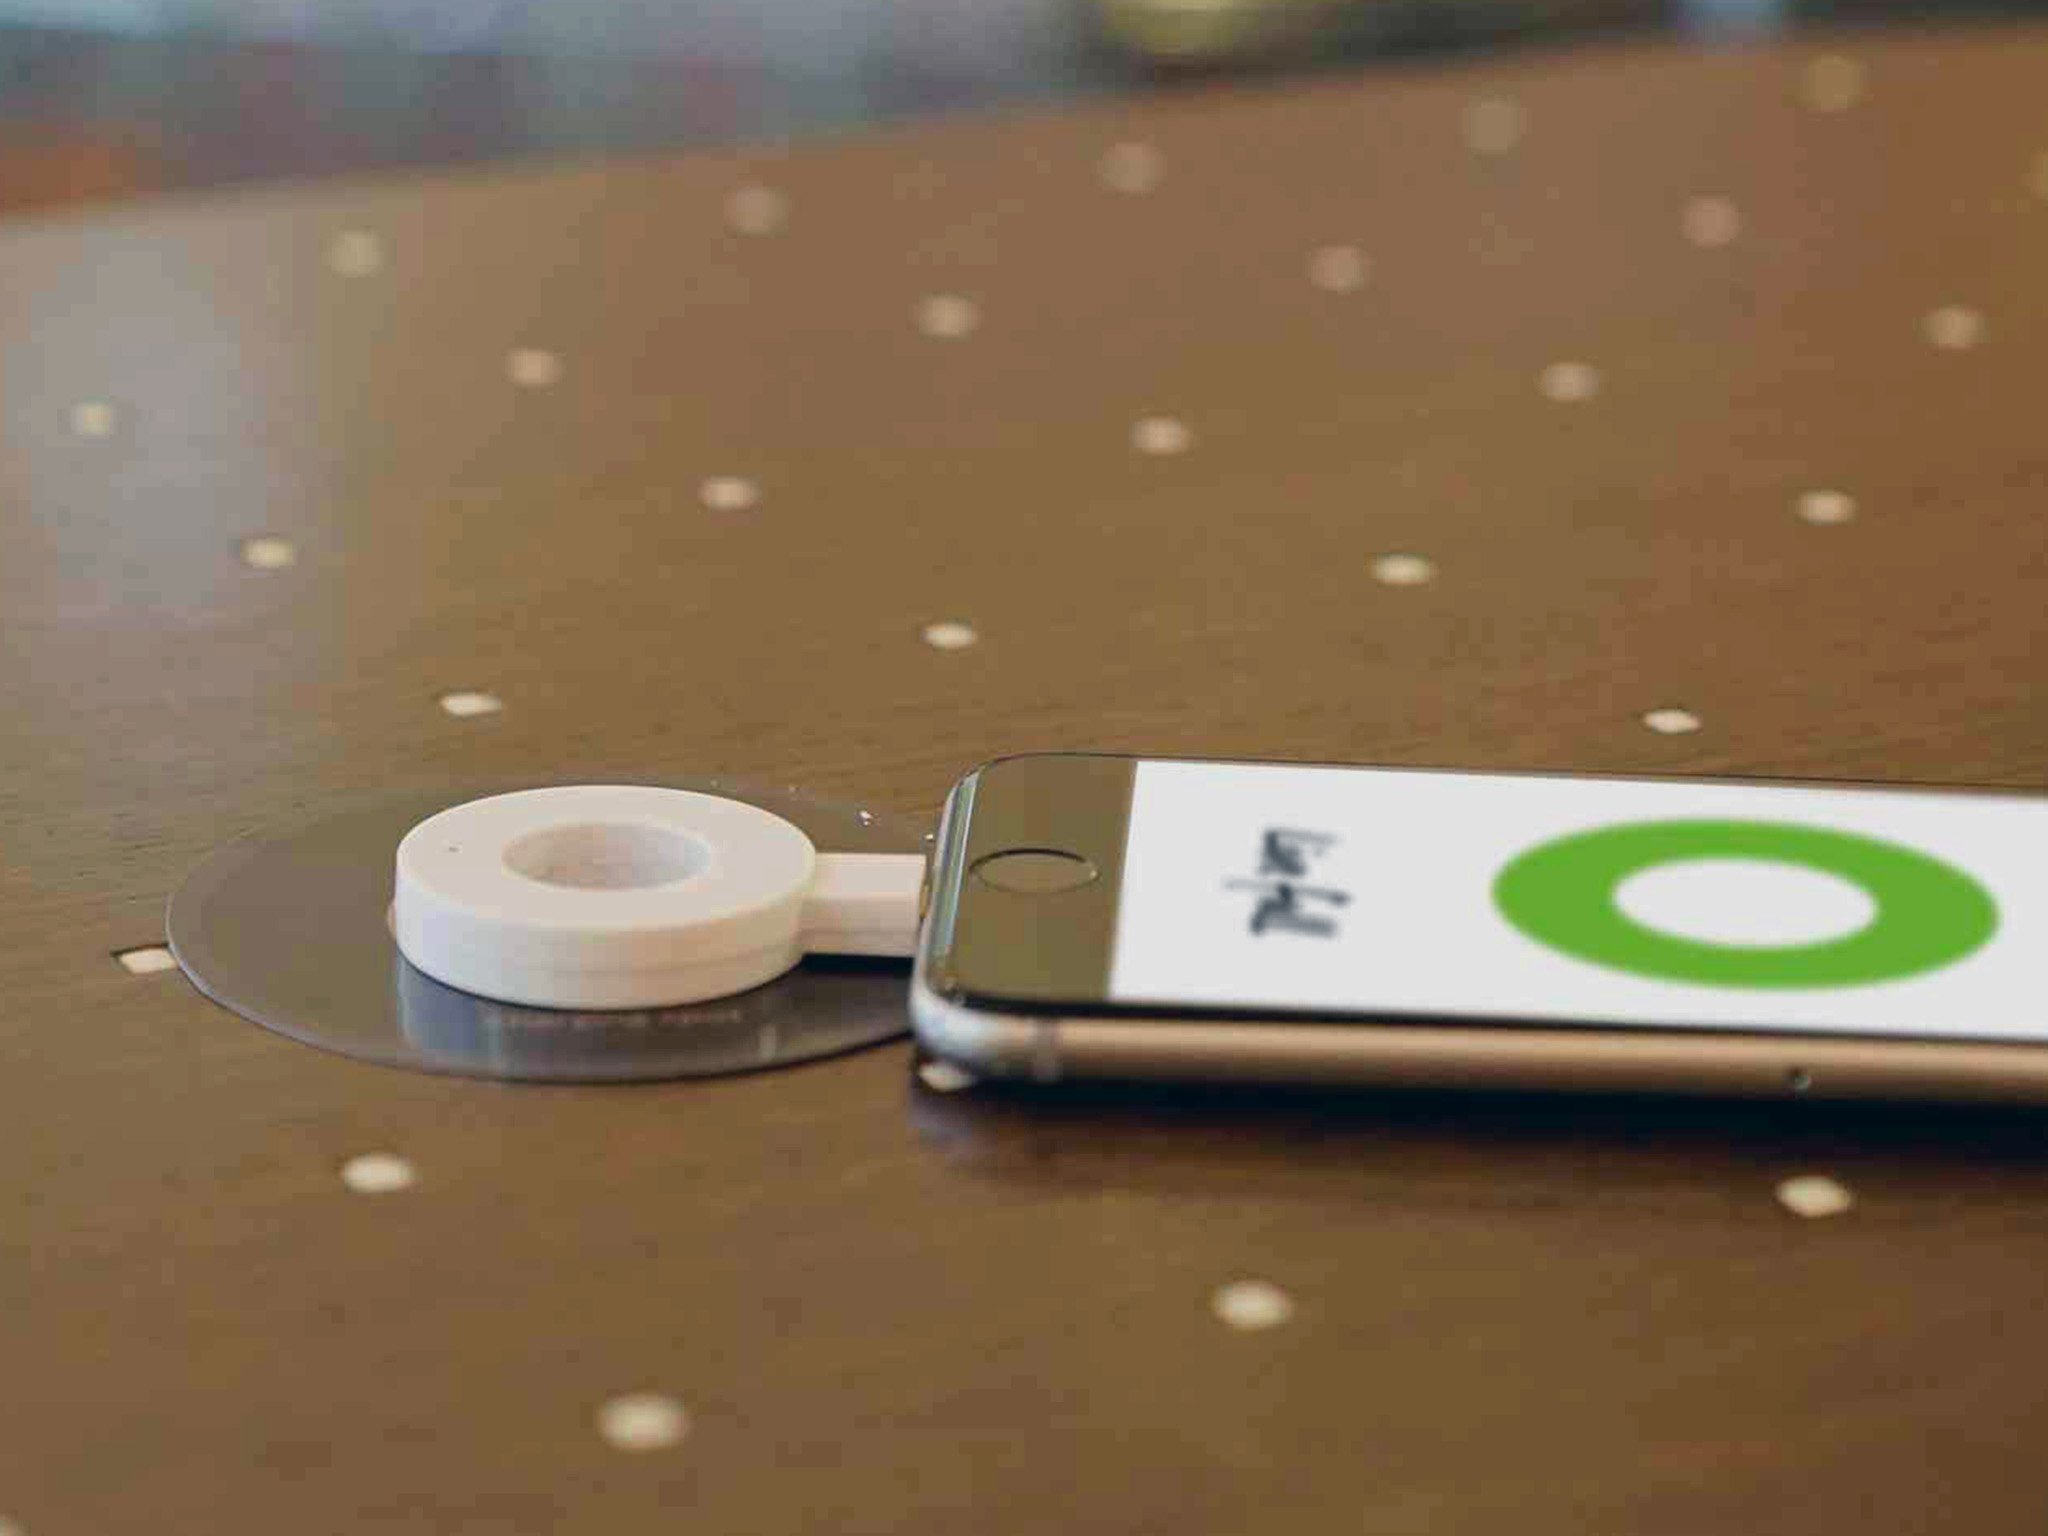 A Powermat charging ring is shown plugged into an iPhone. It&#39;s centered atop a Powermat charging pad thereby charging the phone.